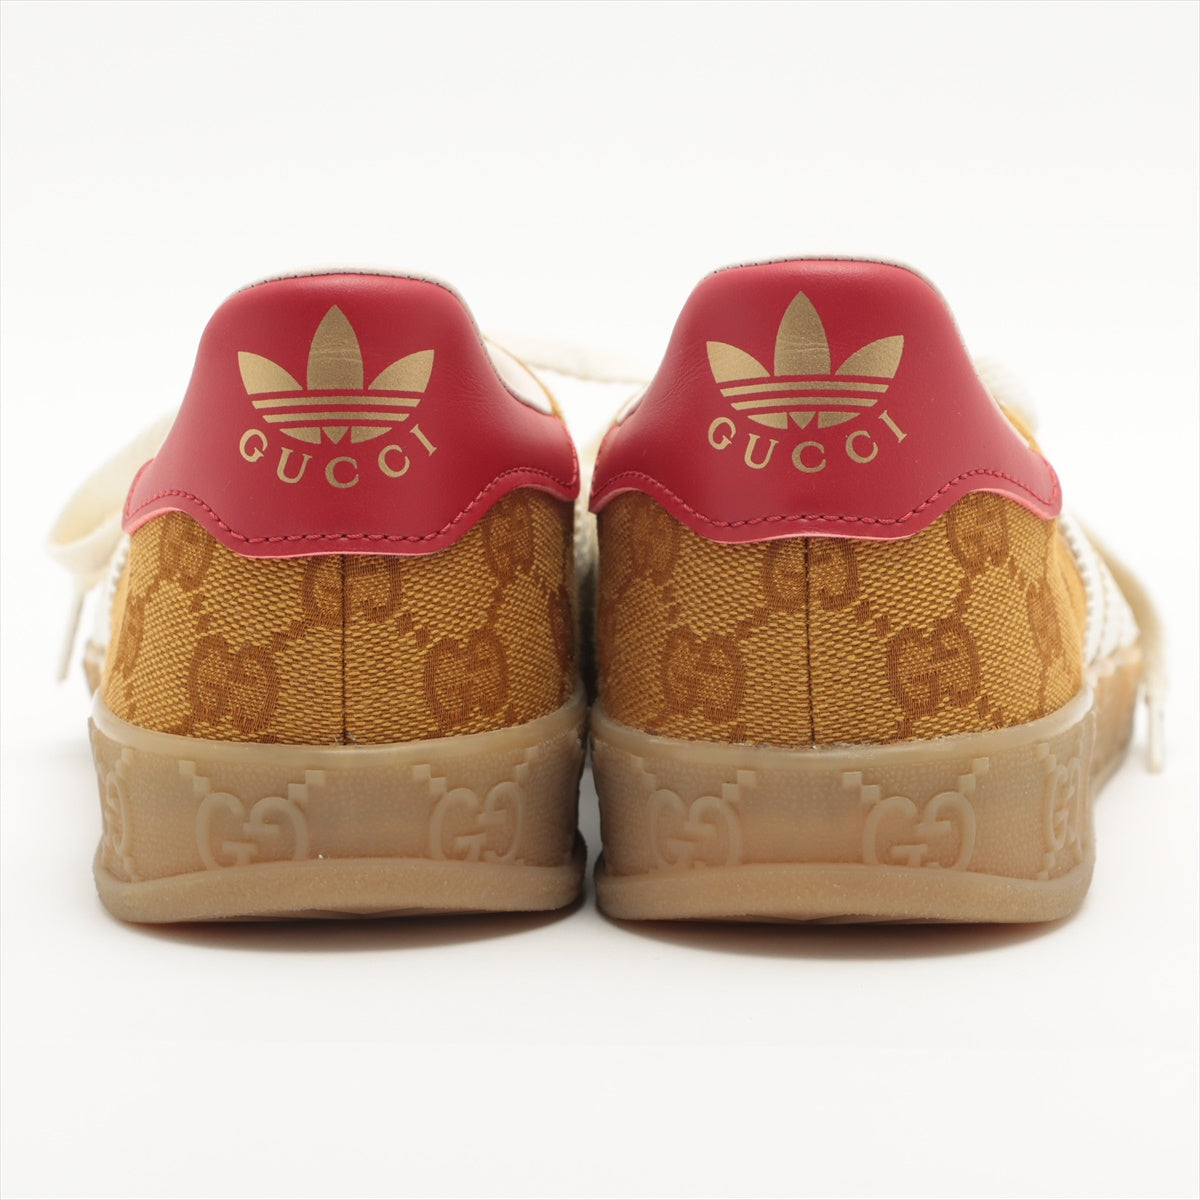 Gucci x adidas Gazelle Canvas & leather Sneakers 23.5㎝ Ladies' Brown HQ7086